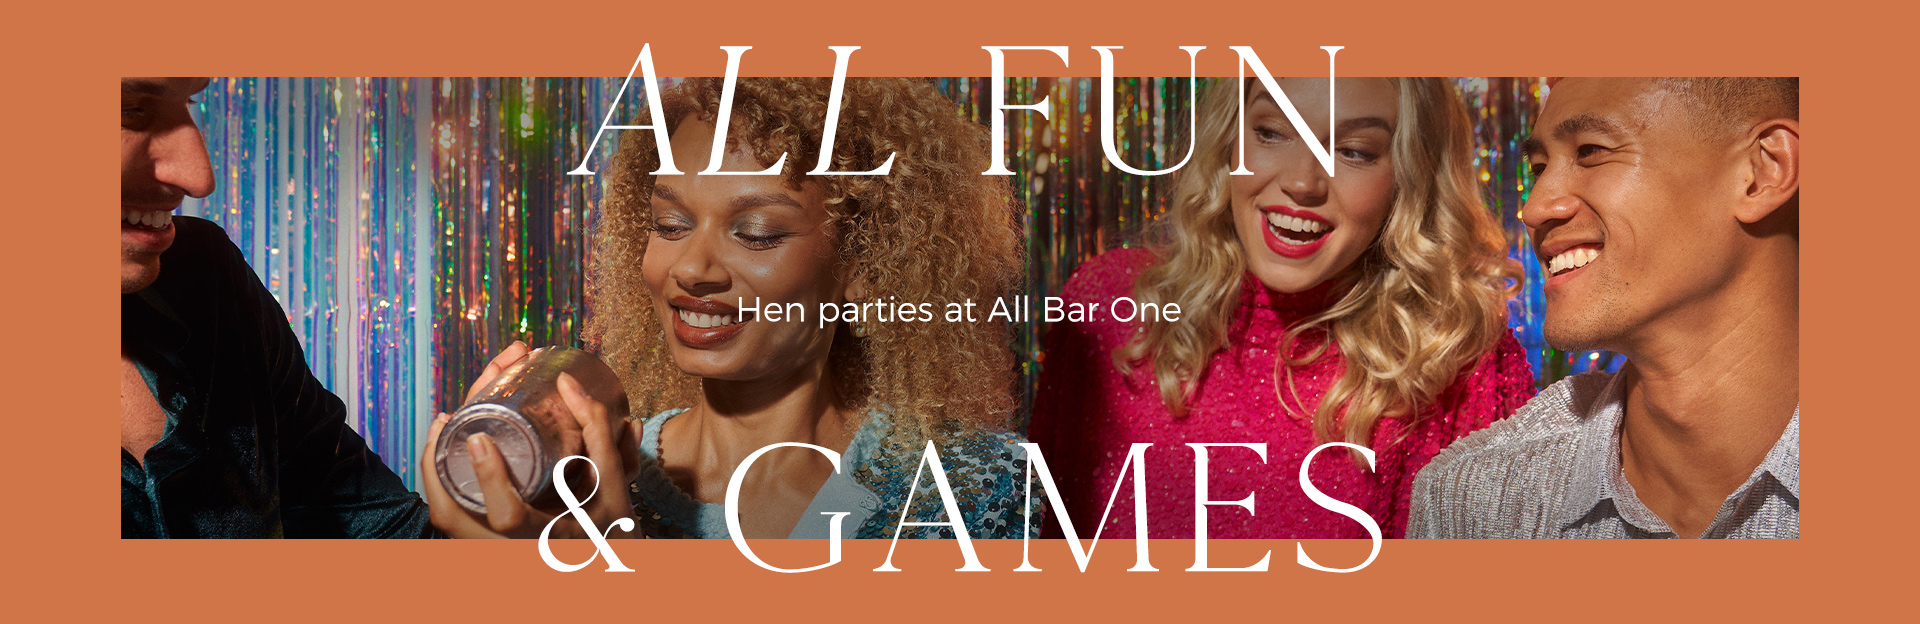 Hen parties at All Bar One Moorgate